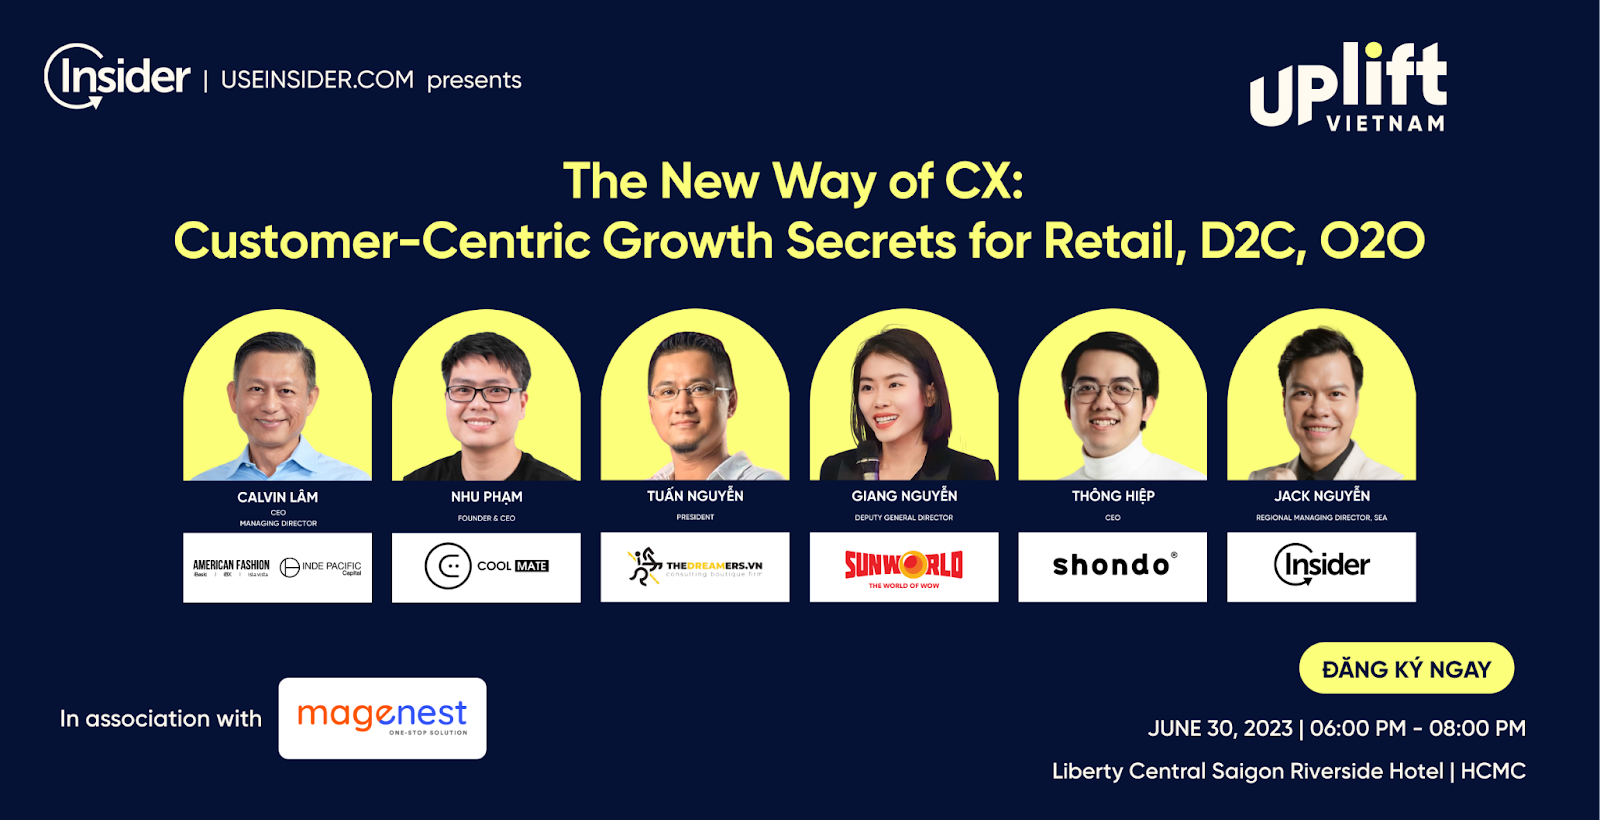 The New Way of CX: Customer-Centric Growth Secrets for Retail, D2C, O2O